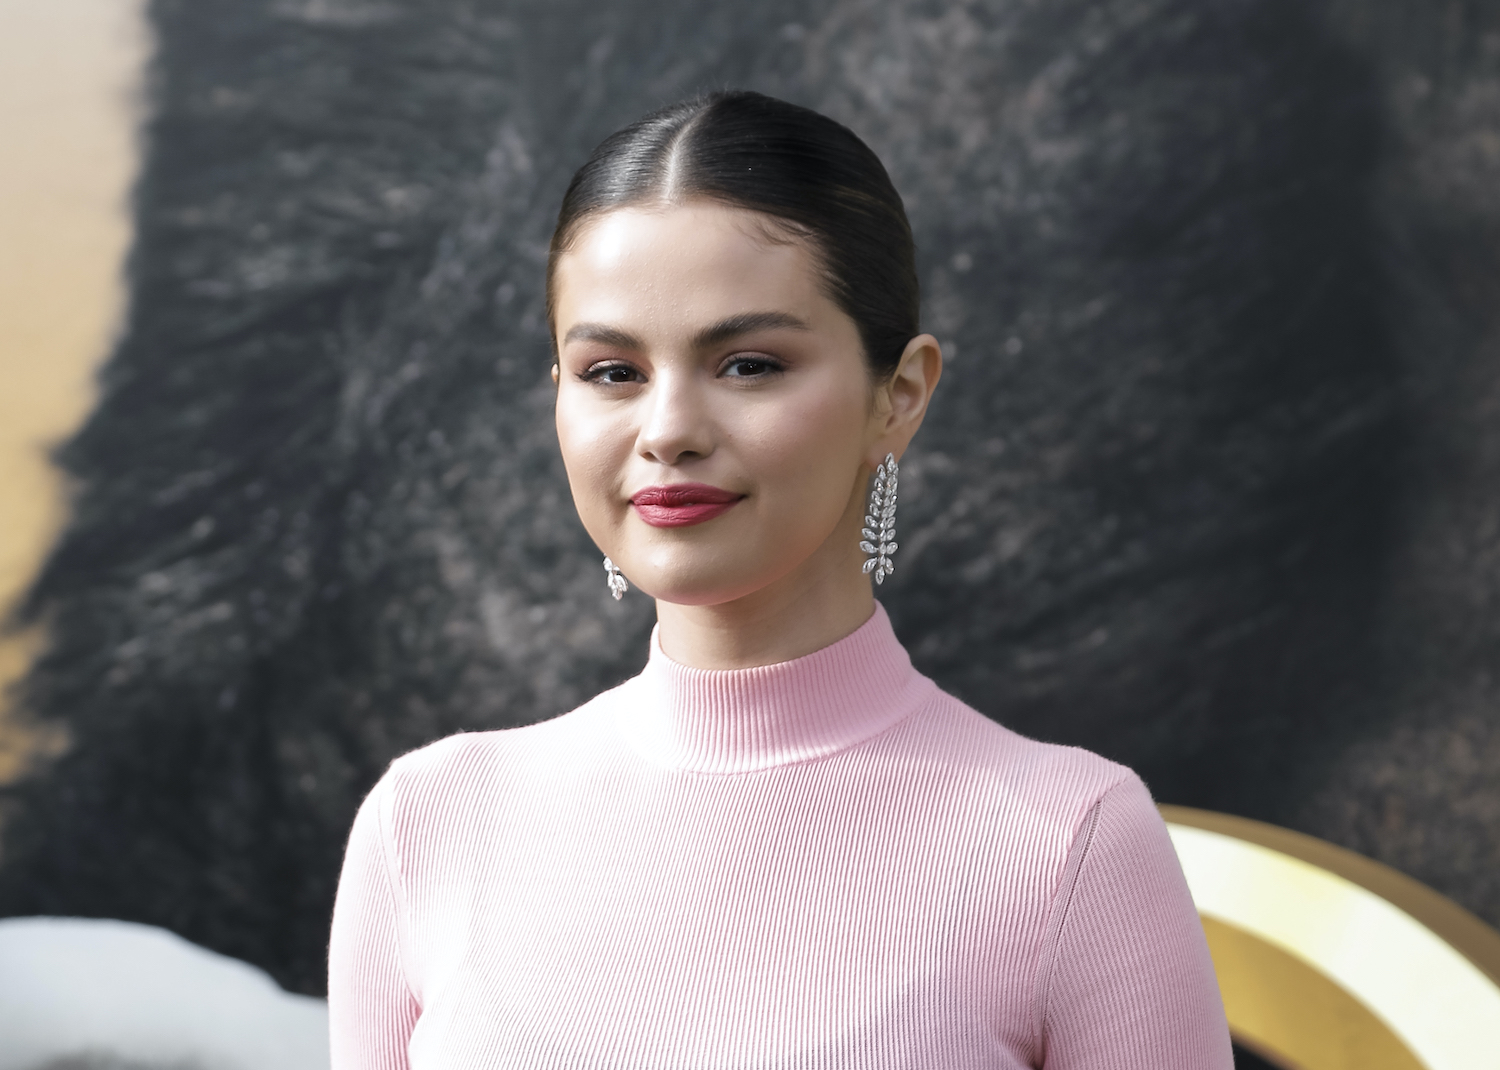 Selena Gomez attends the Premiere of 'Dolittle Dolittle at Regency Village Theatre on January 11, 2020